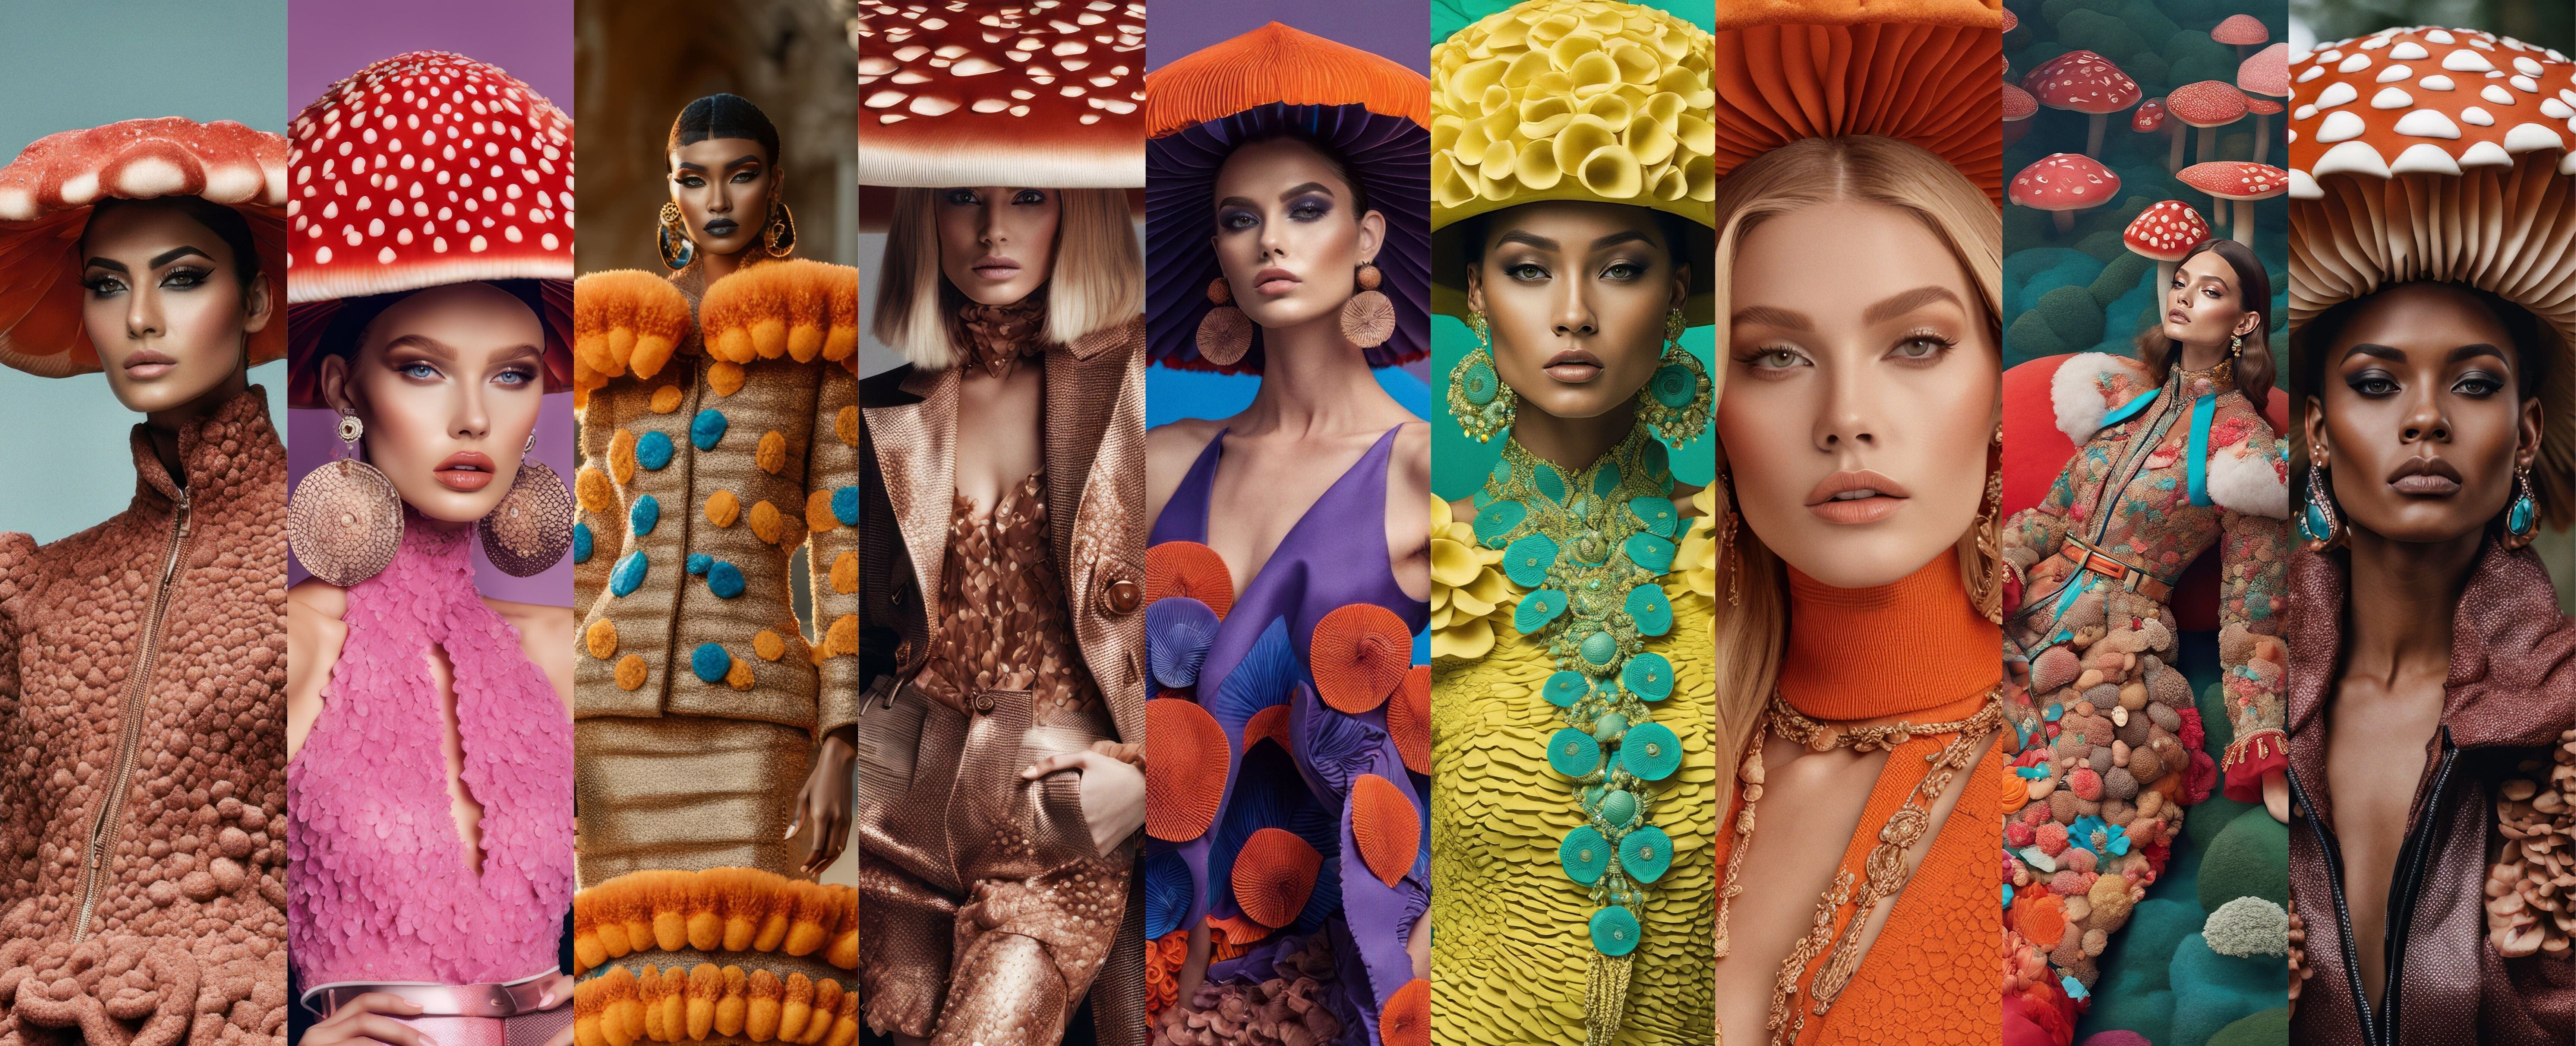 Shroomtastic Style: Exploring Mushroom Couture with AI